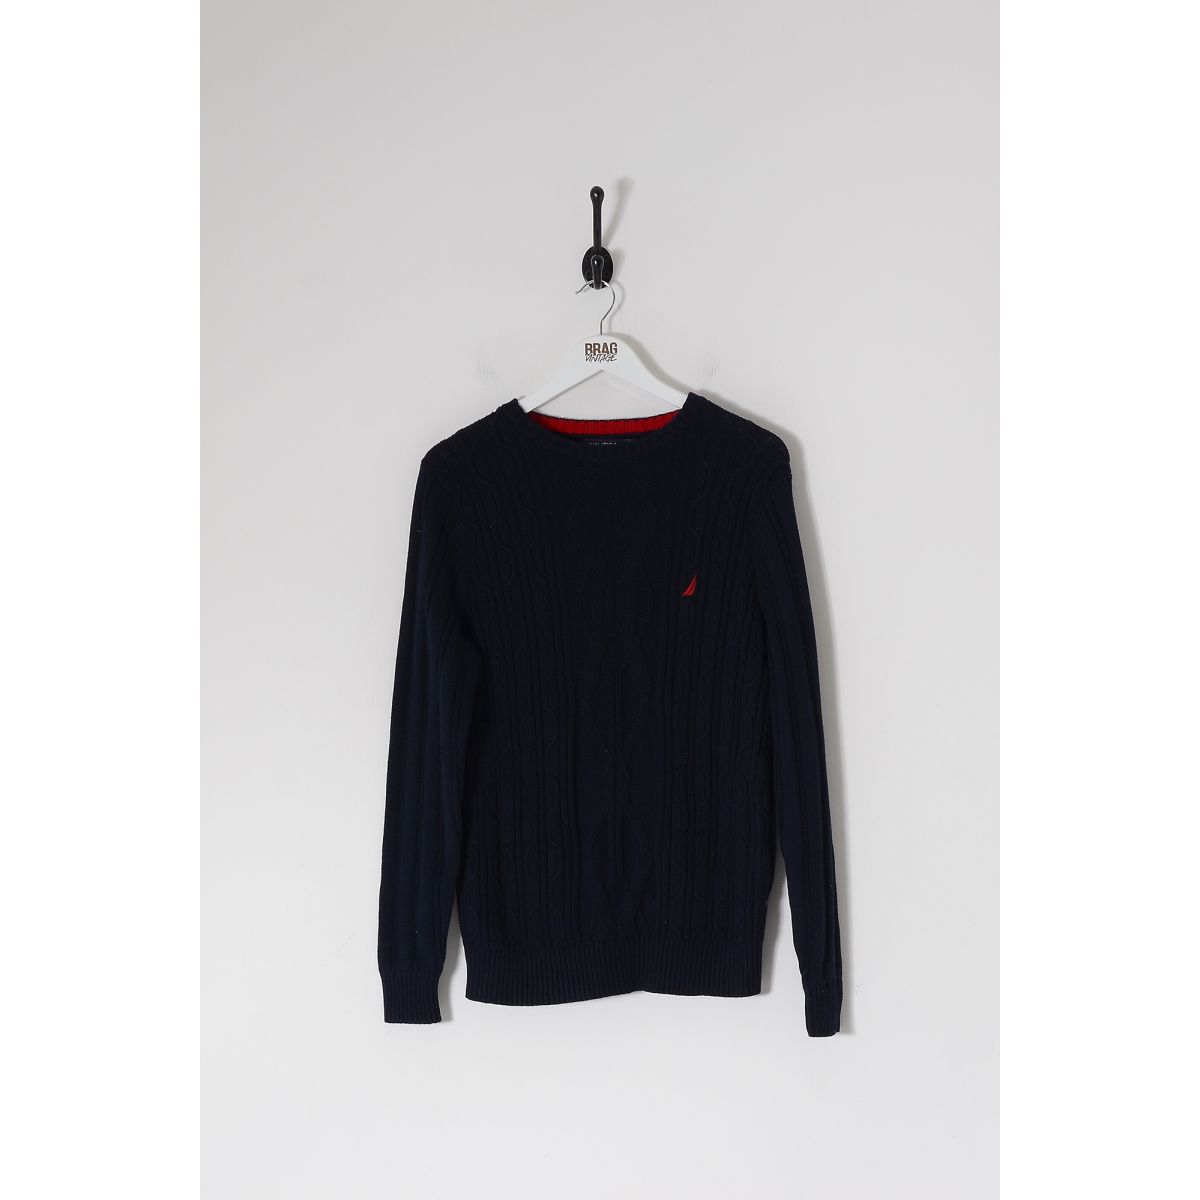 Vintage NAUTICA Oversized Crew Neck Cable Knit Jumper Black Small